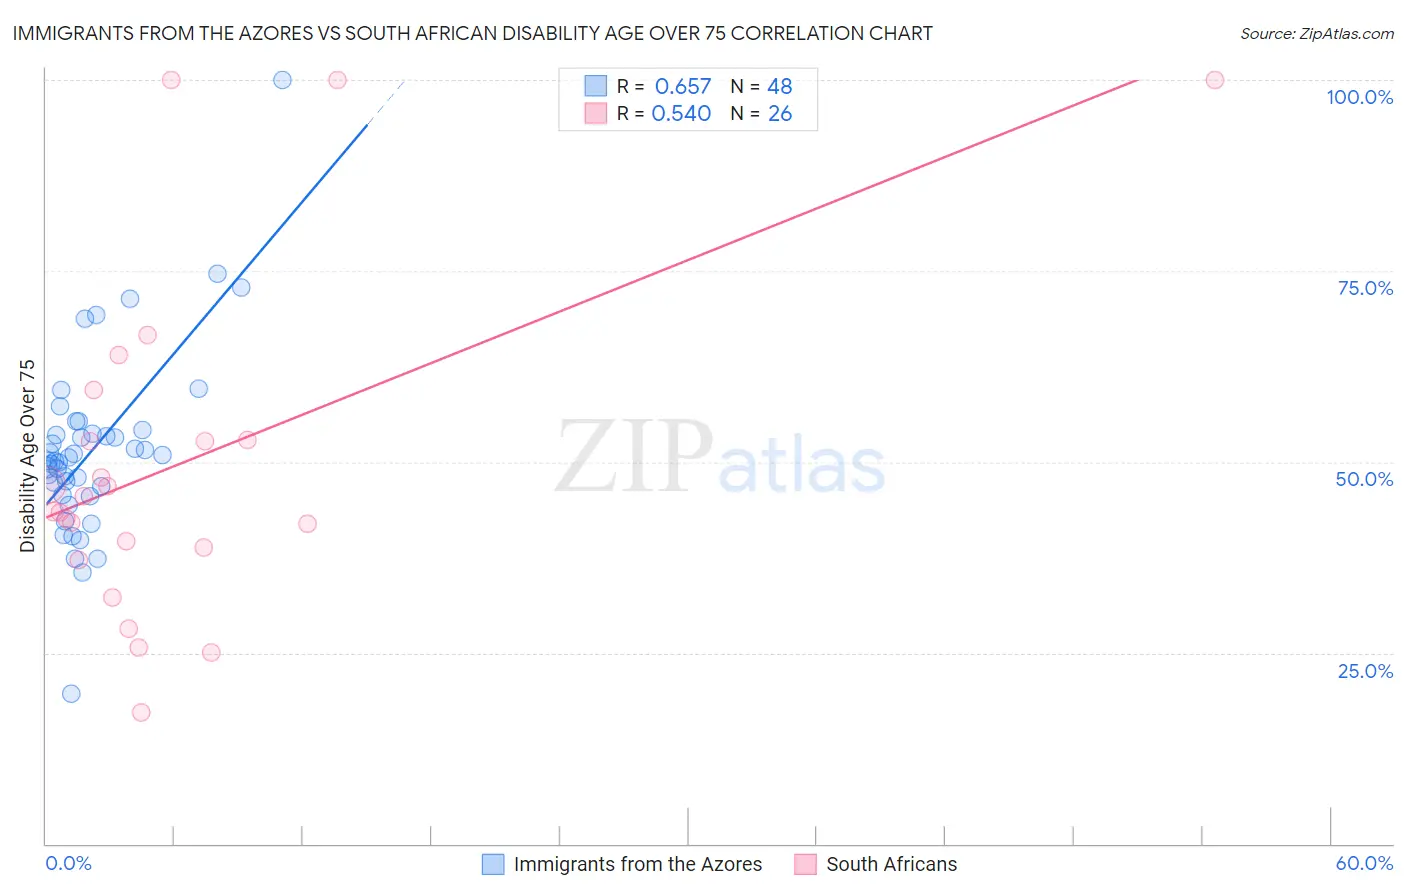 Immigrants from the Azores vs South African Disability Age Over 75